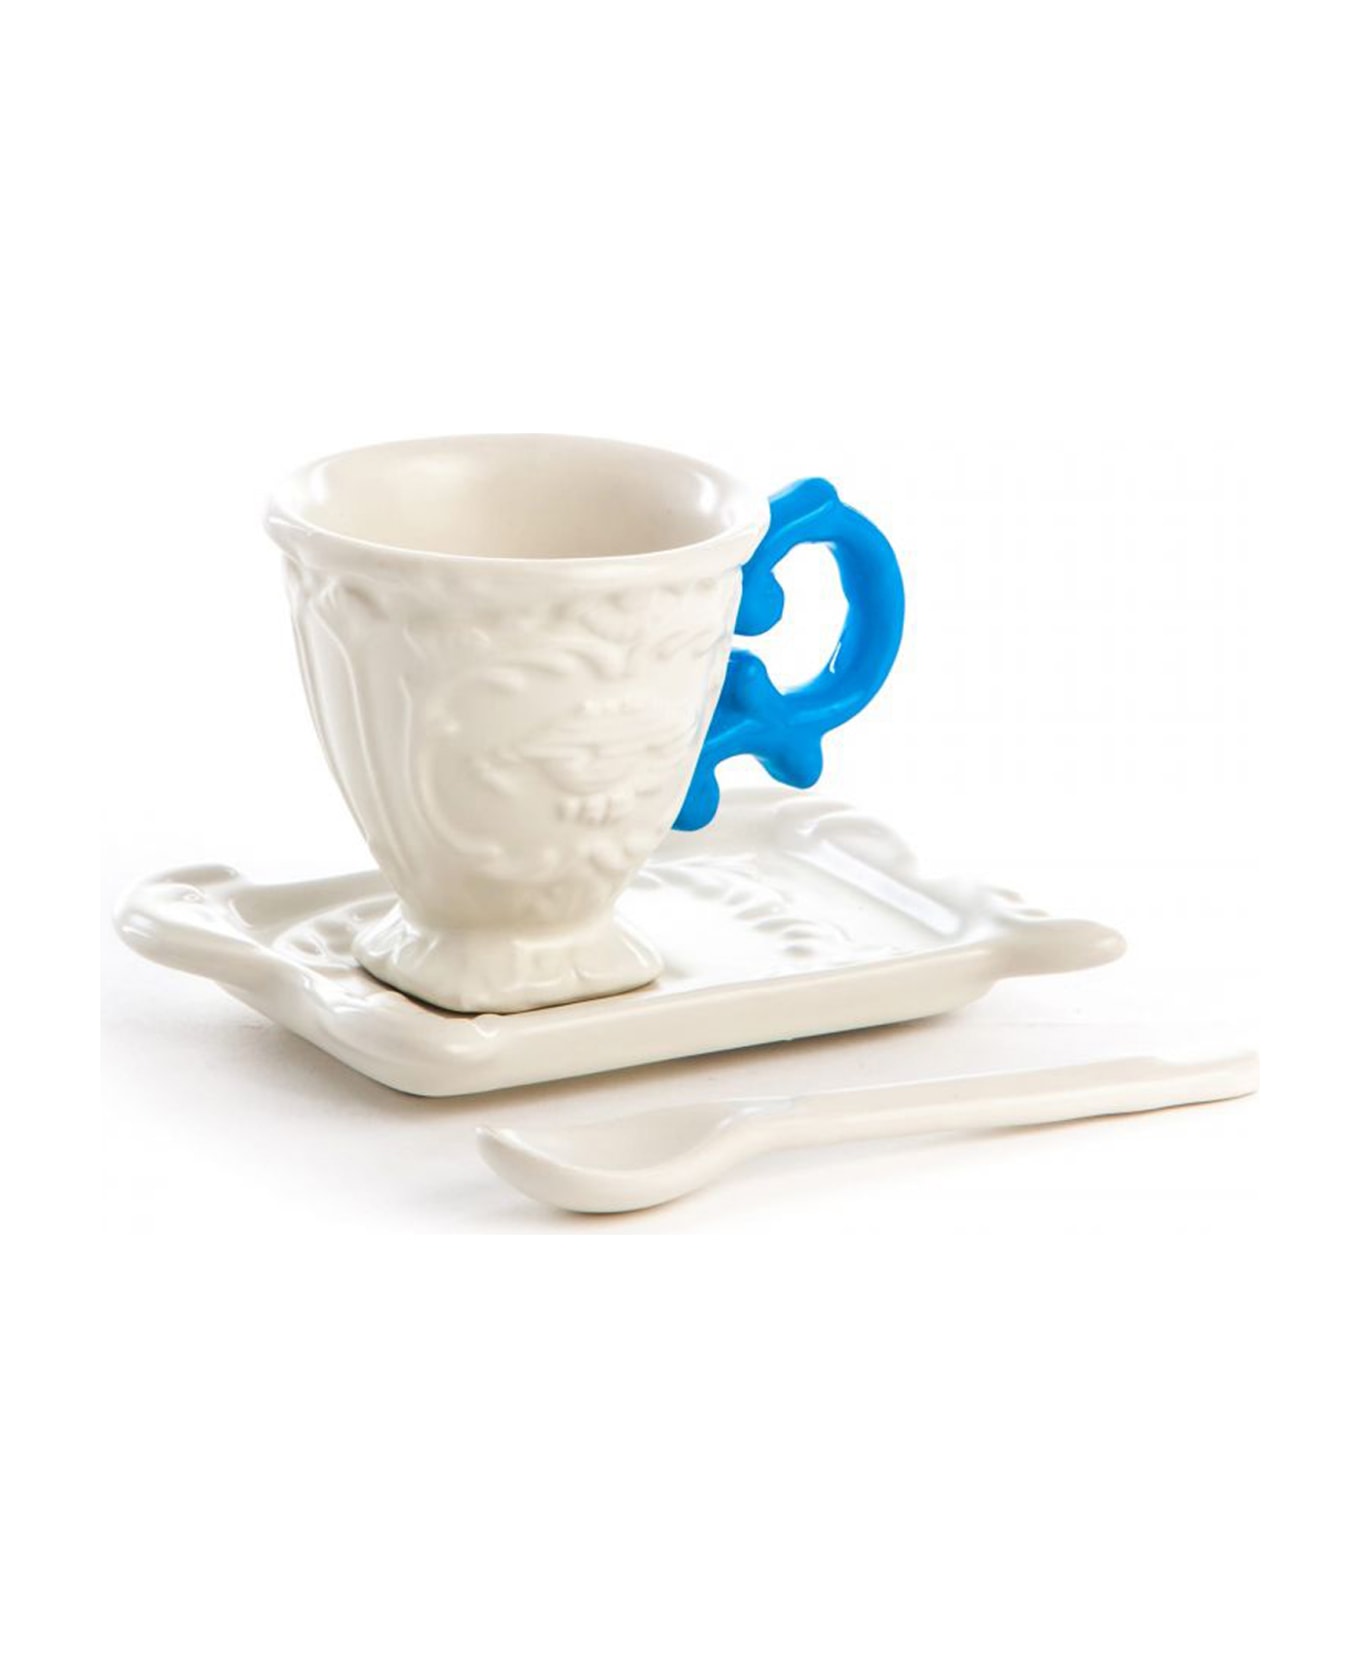 Seletti 'i-wares' Cup - Light Blue